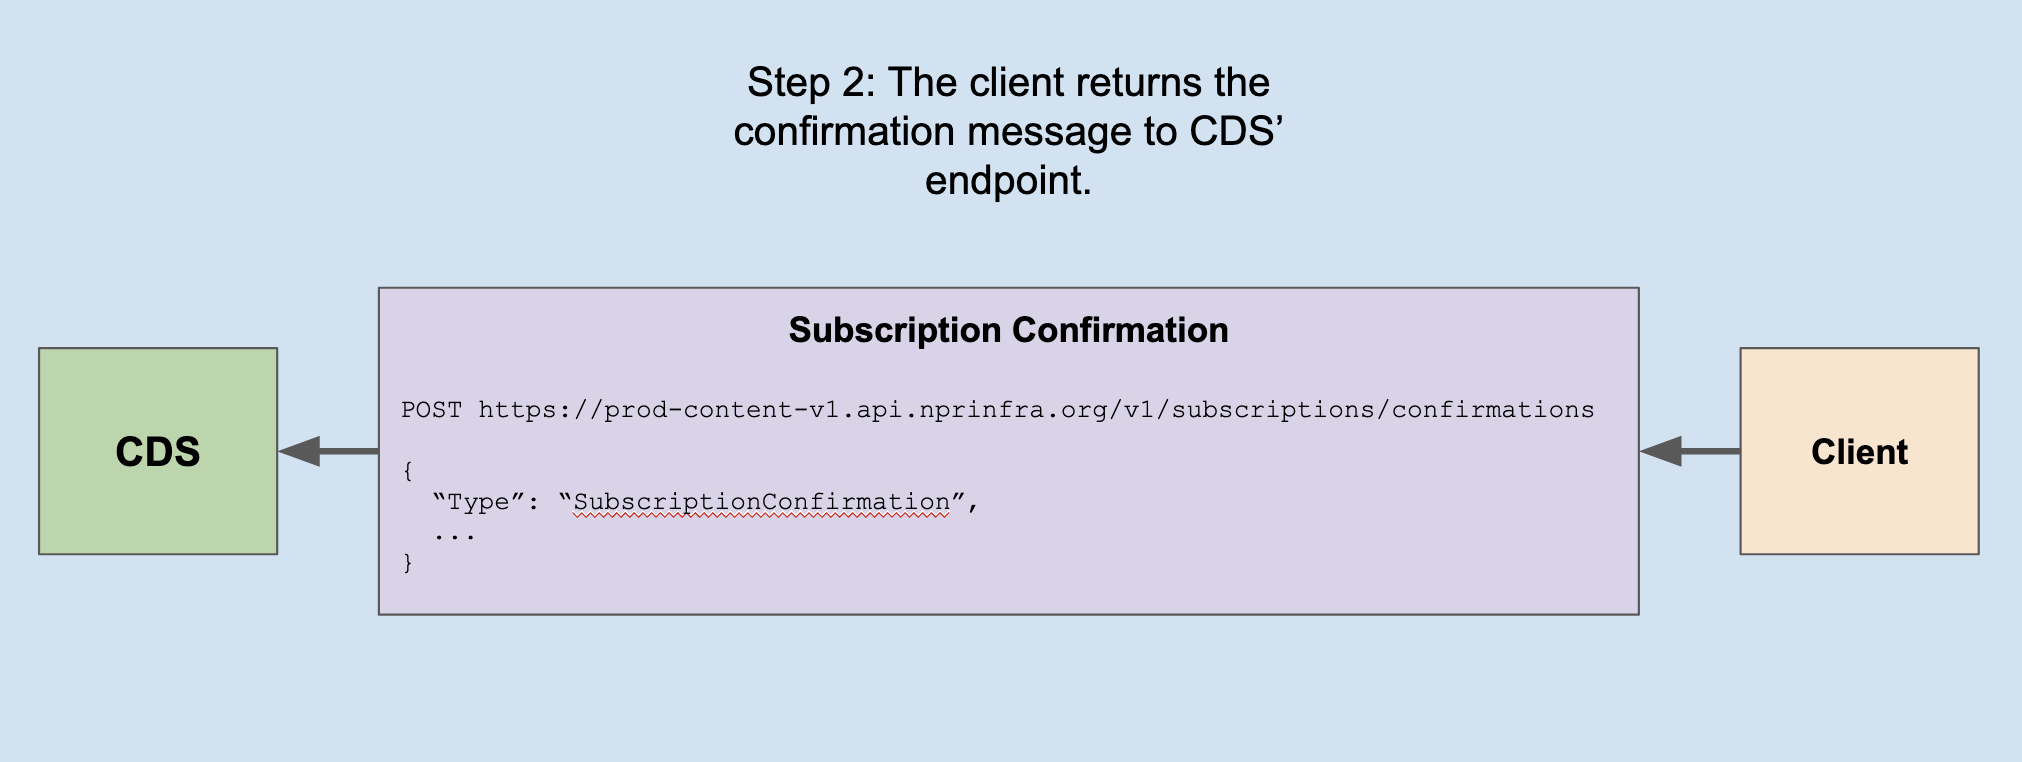 Subscription confirmation step 2